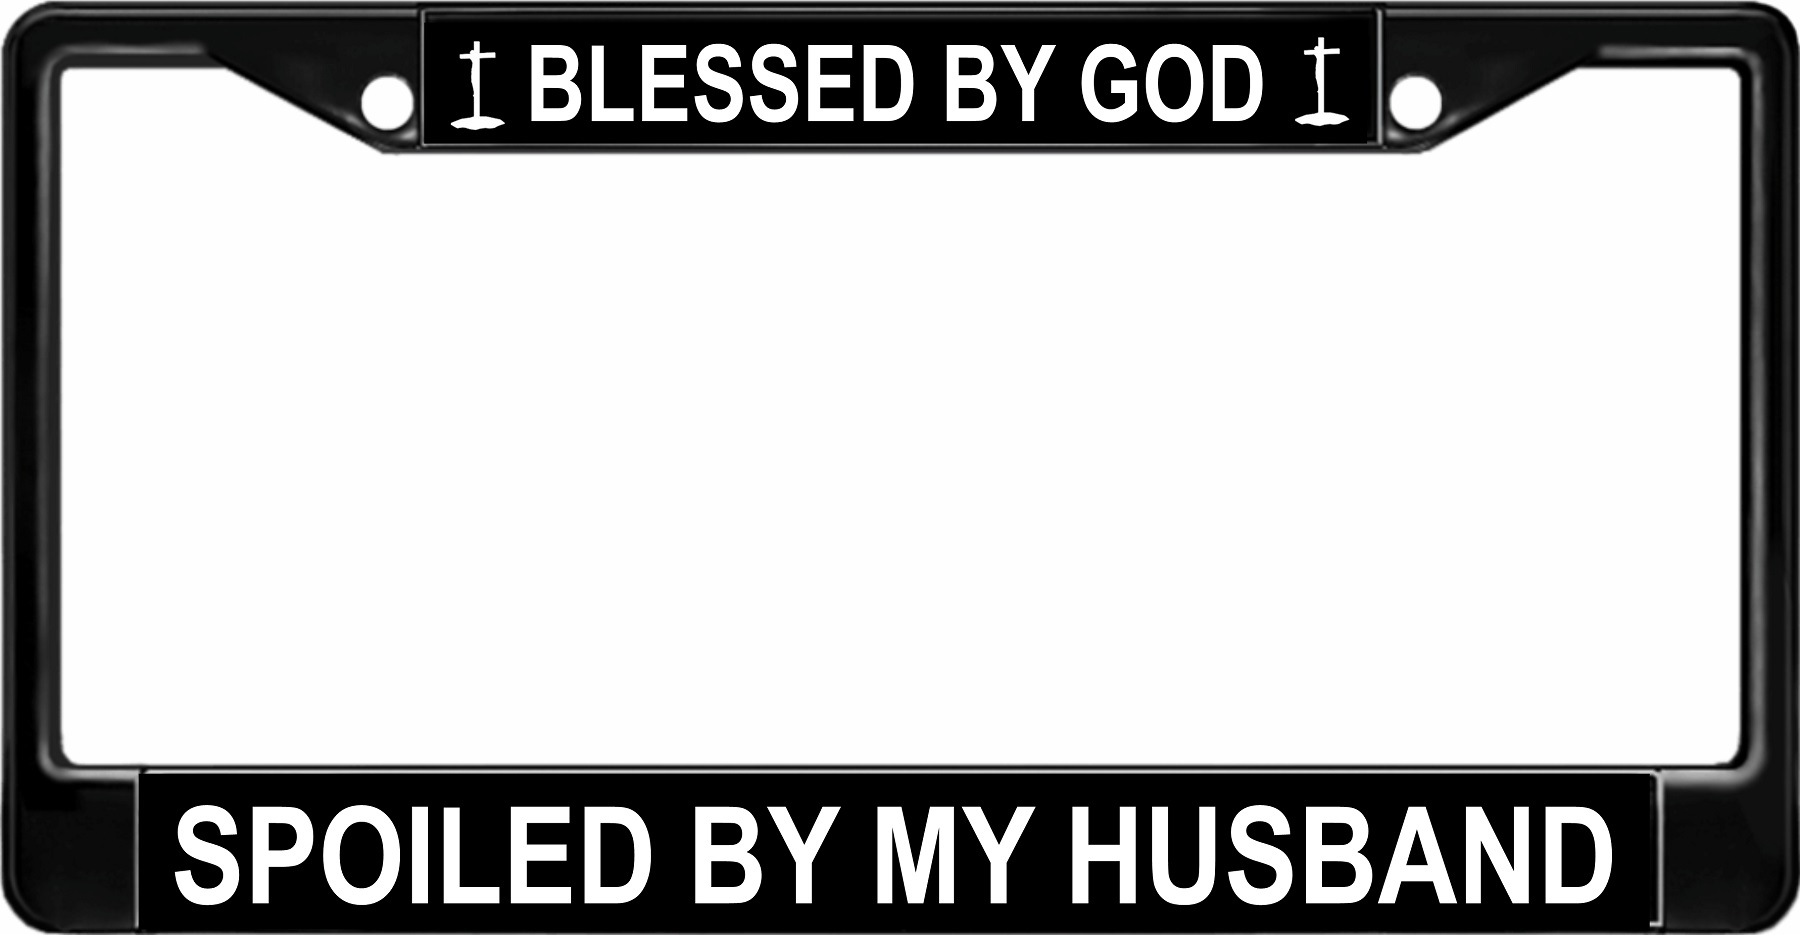 License Plates Online Blessed By God Spoiled By My Husband Black License Plate Frame